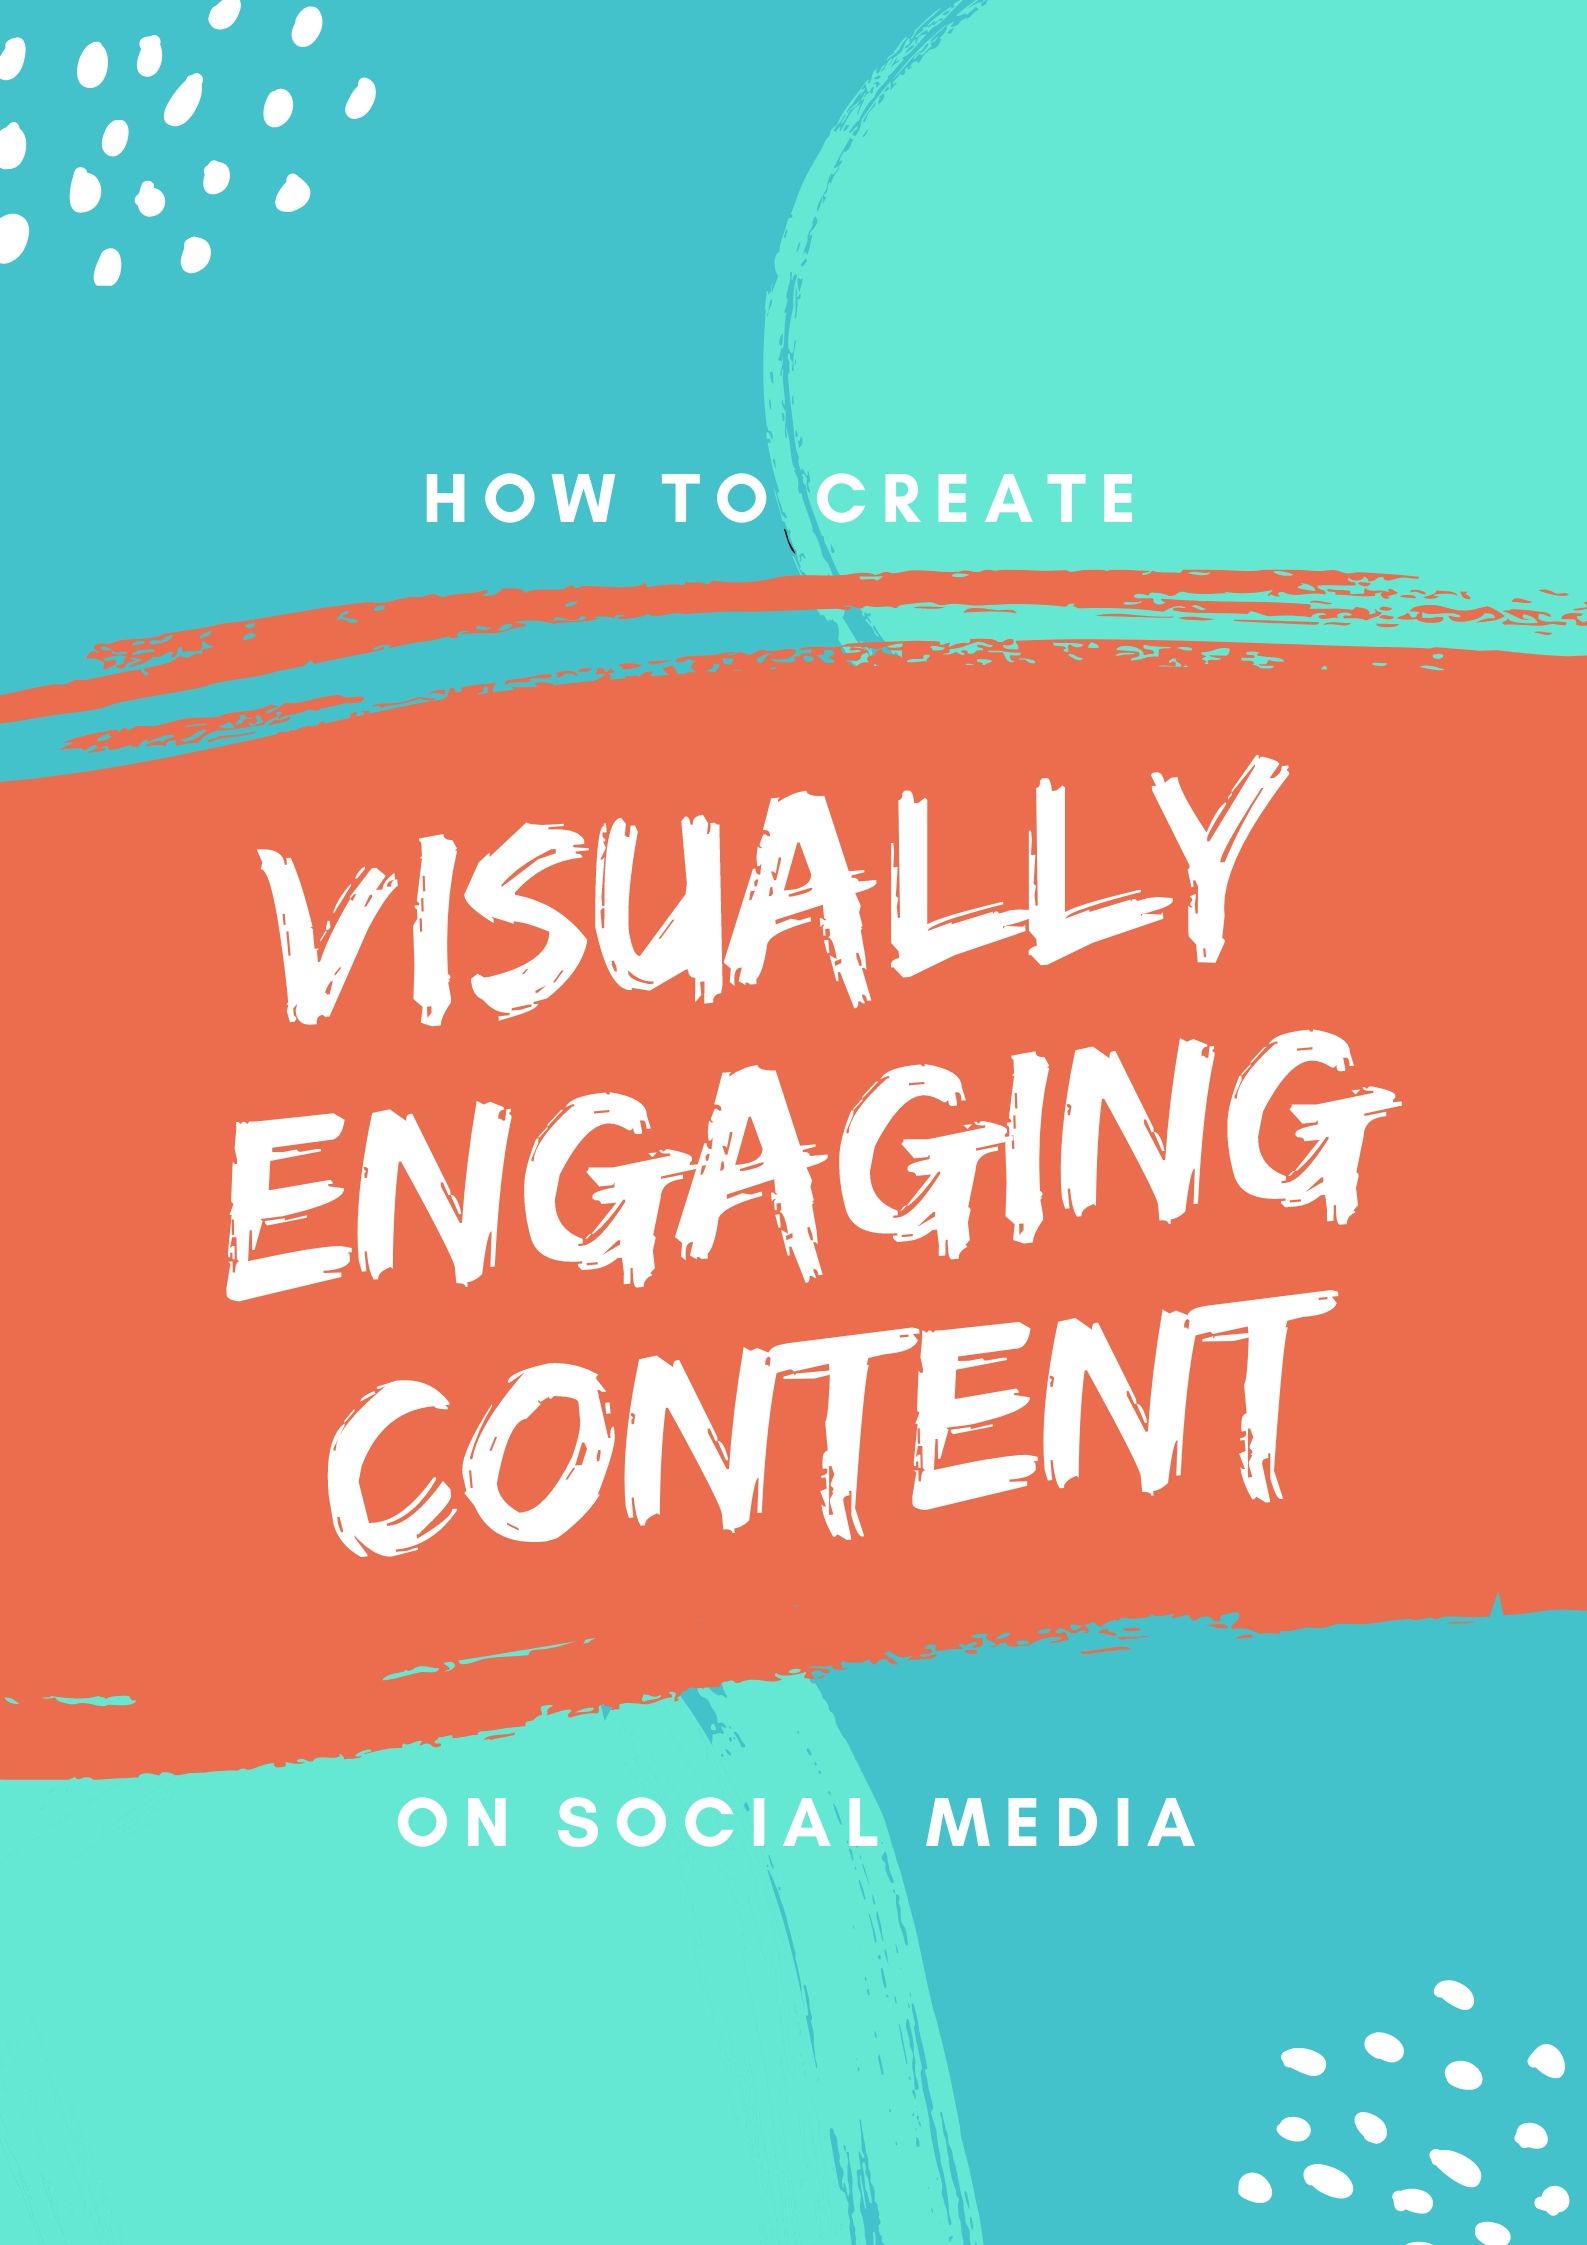 "ana.jpg" alt="ana how to create visually engaging content poster"/> 